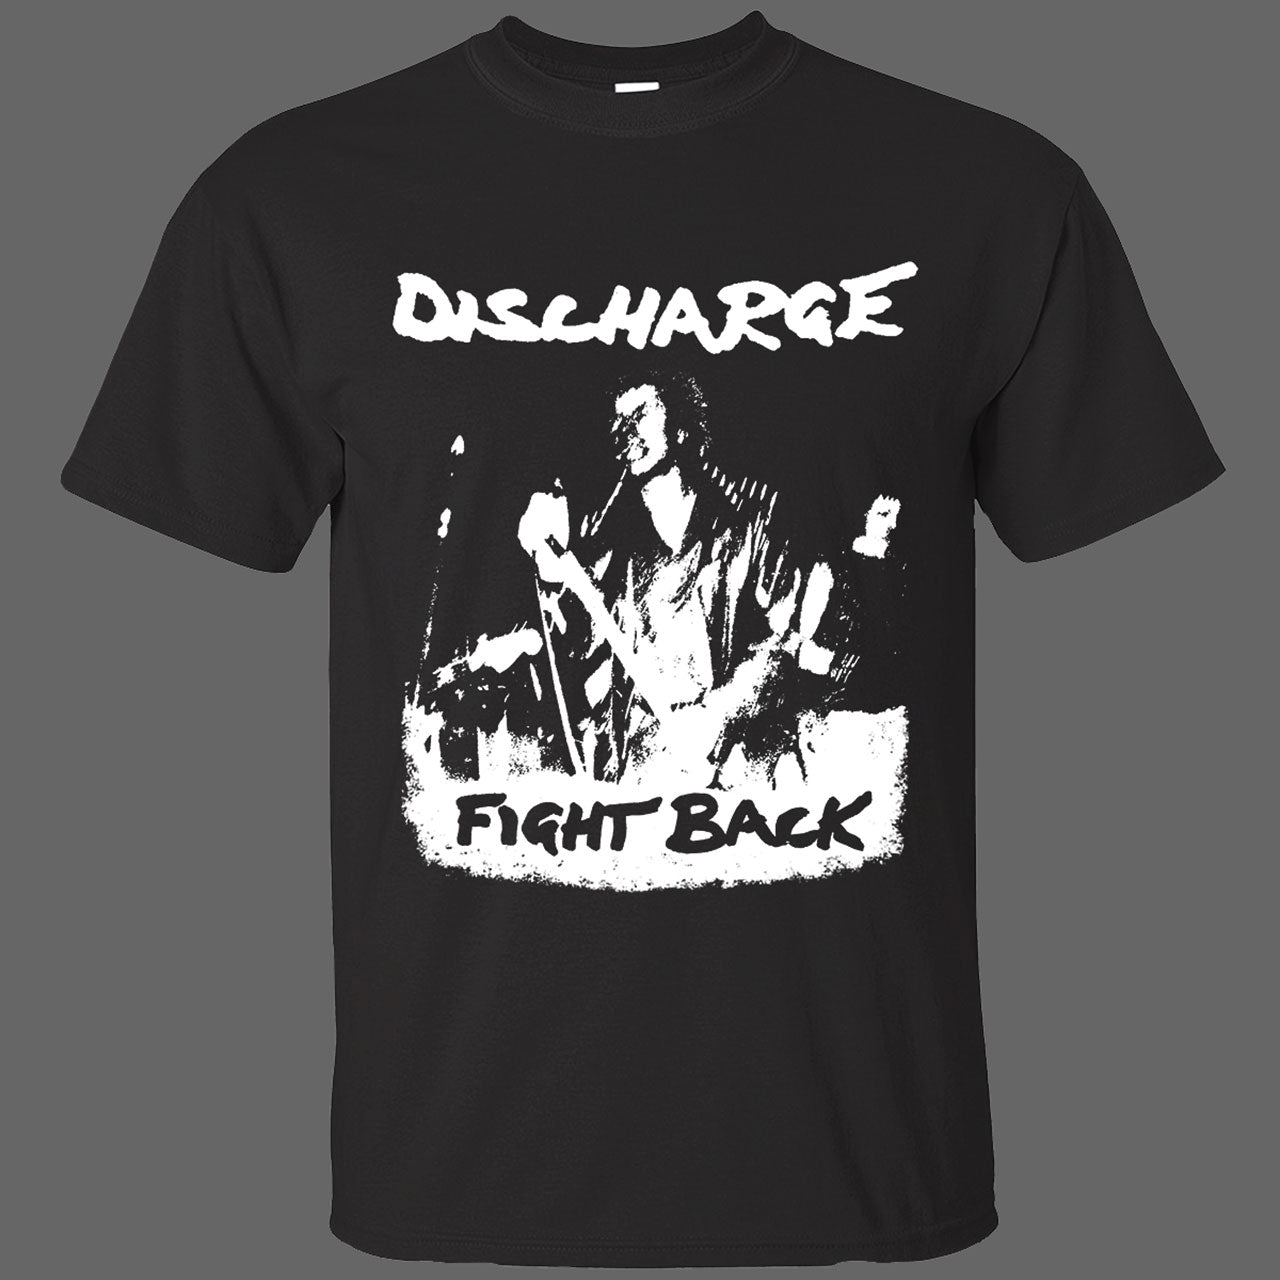 Discharge - Fight Back (T-Shirt)